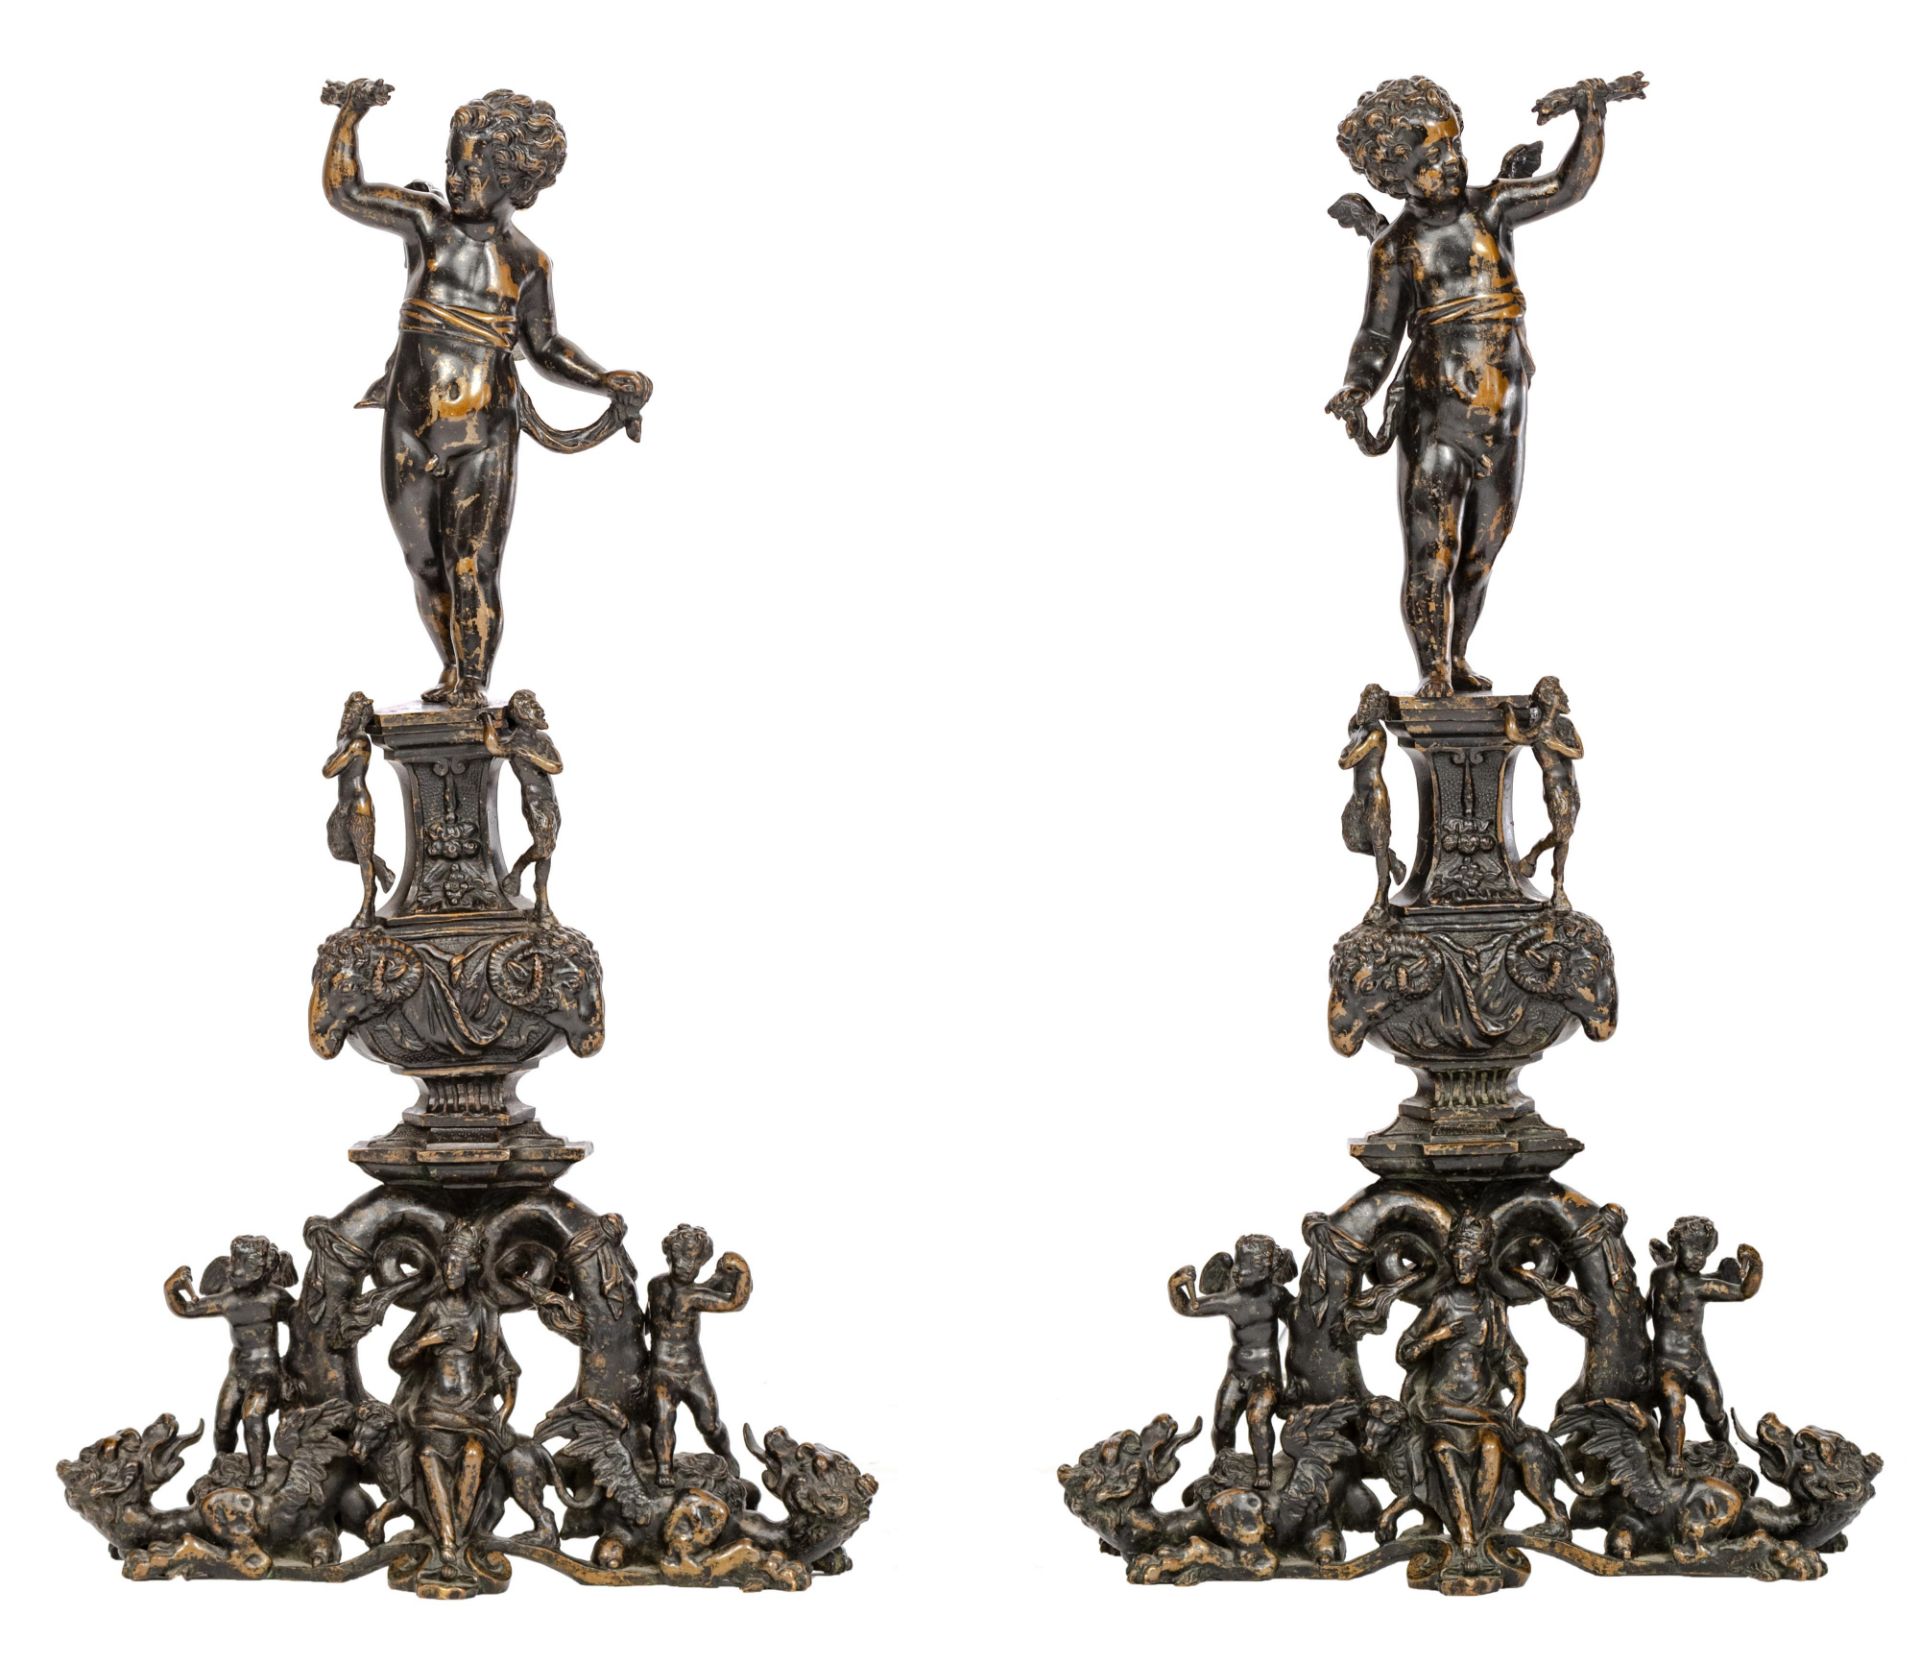 An impressive pair of Renaissance style patinated bronze andirons, topped with winged putti above an